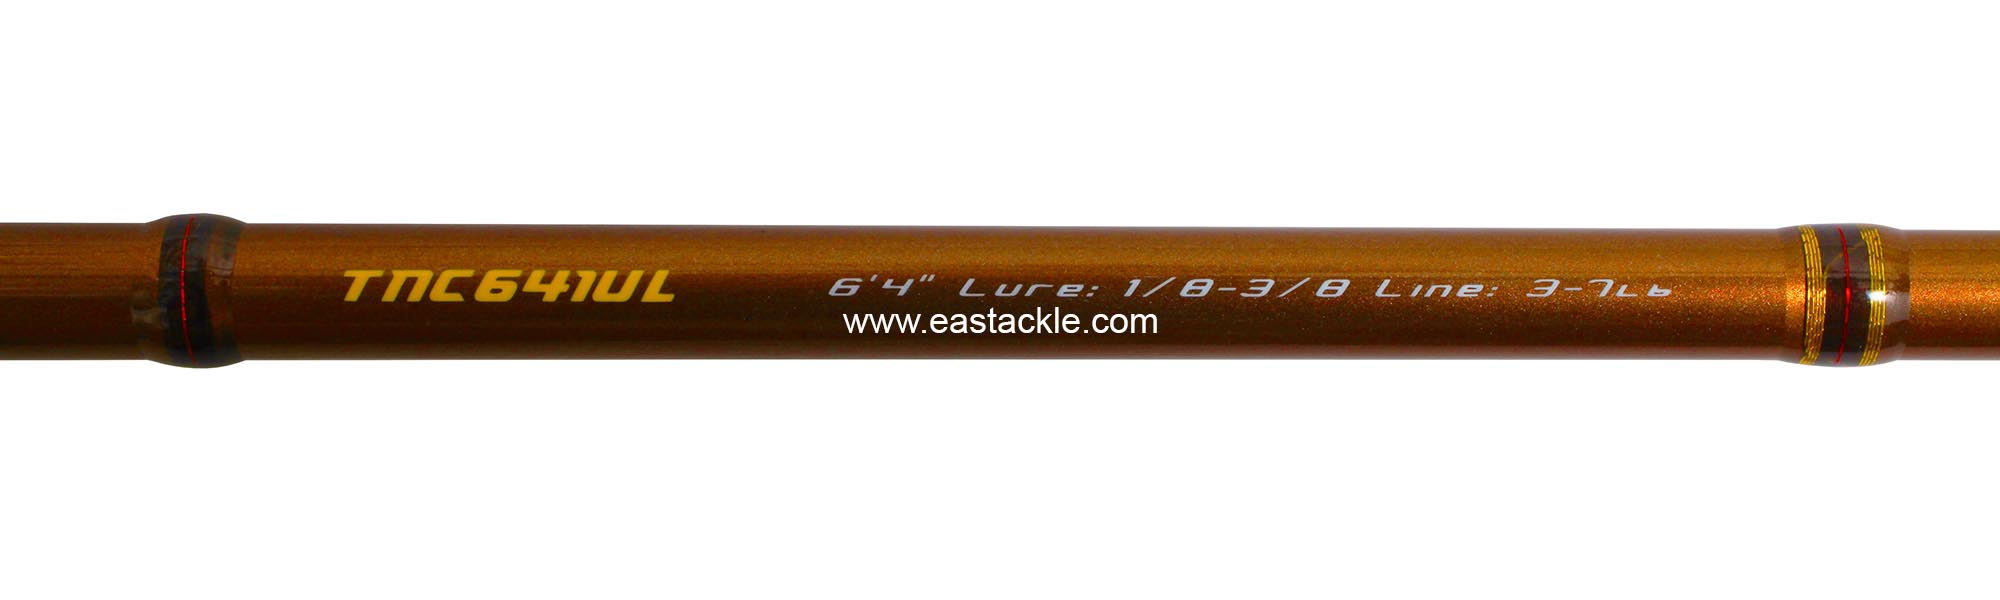 Storm - Teenie - TNC641UL - Bait Casting Rod - Blank Specifications (Top View) | Eastackle